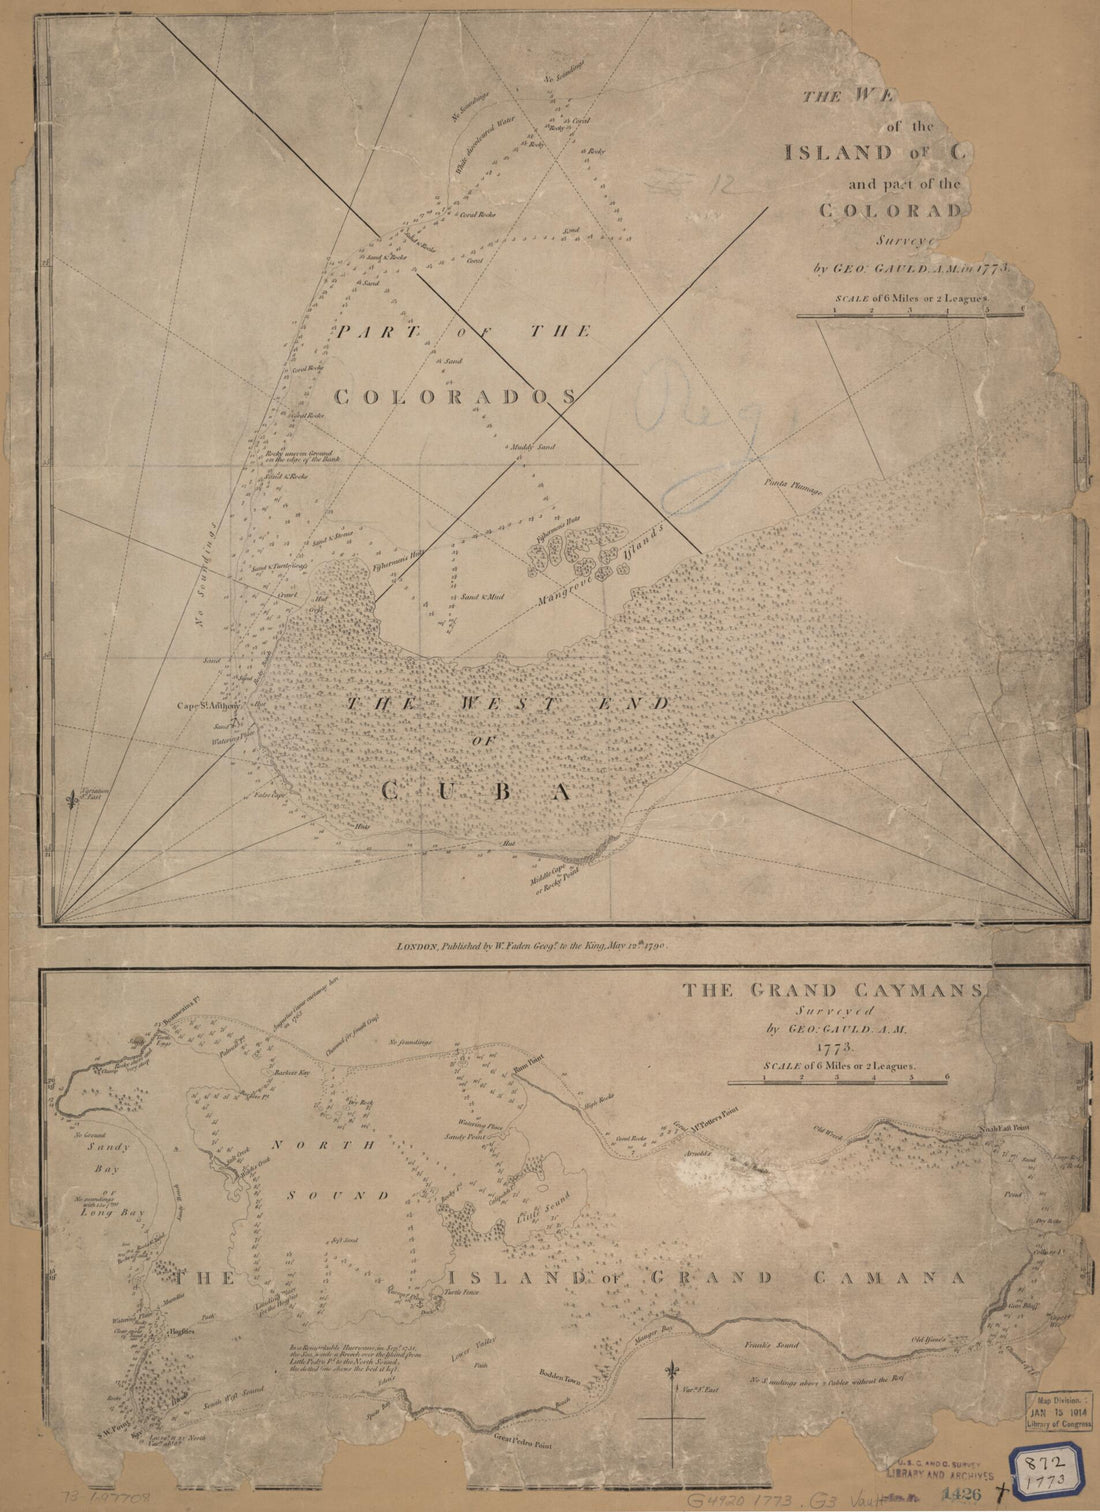 This old map of The West End of the Island of Cuba and Part of the Colorados from 1790 was created by William Faden, George Gauld in 1790